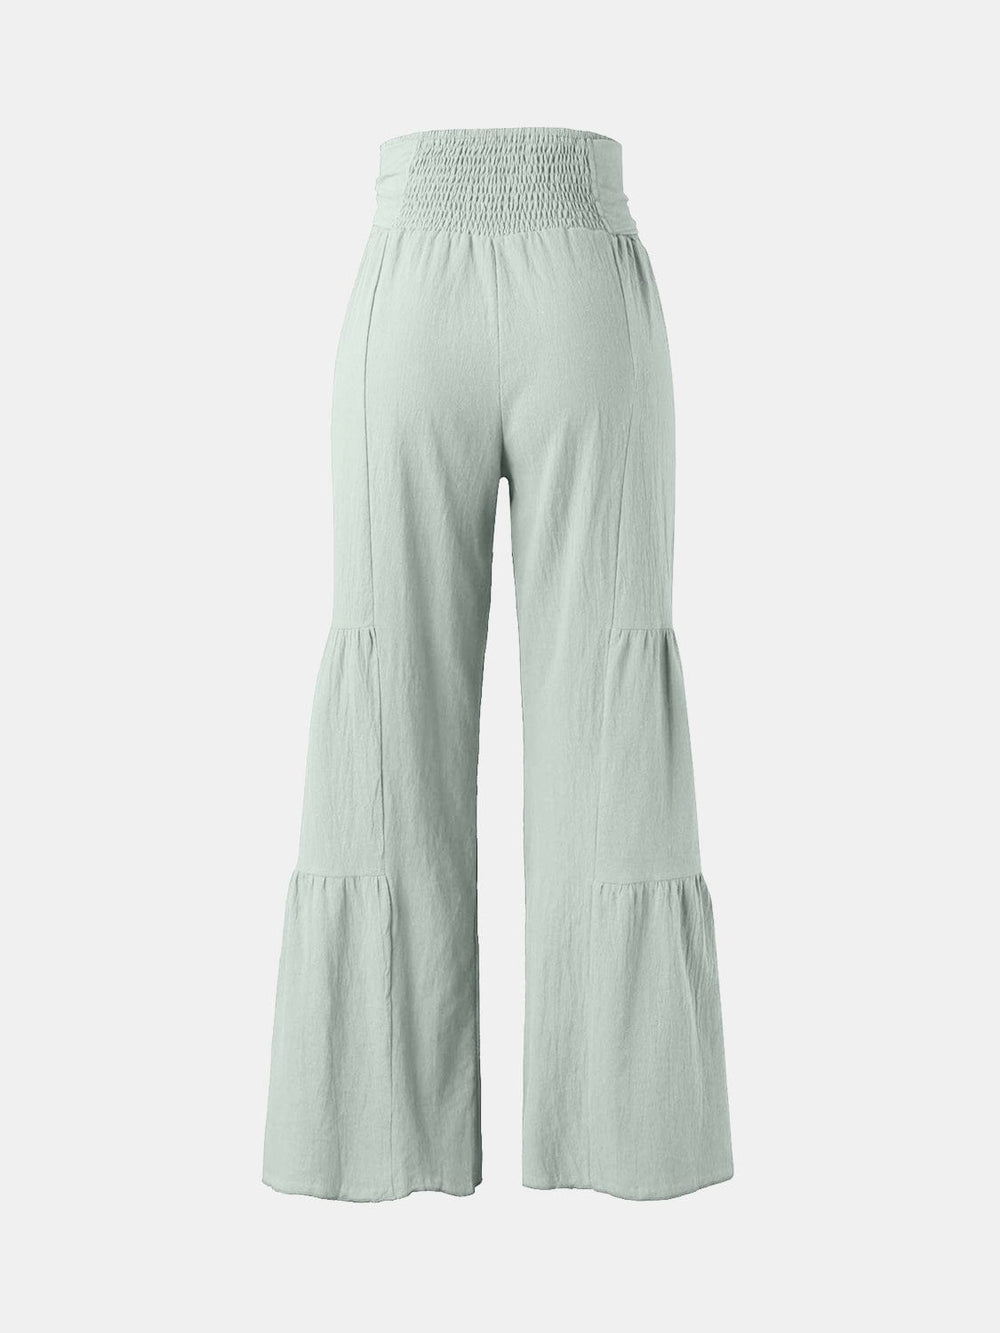 The802Gypsy Bottoms/Pants & Culotte Light Green / S GYPSY-Tied Ruched Wide Leg Pants